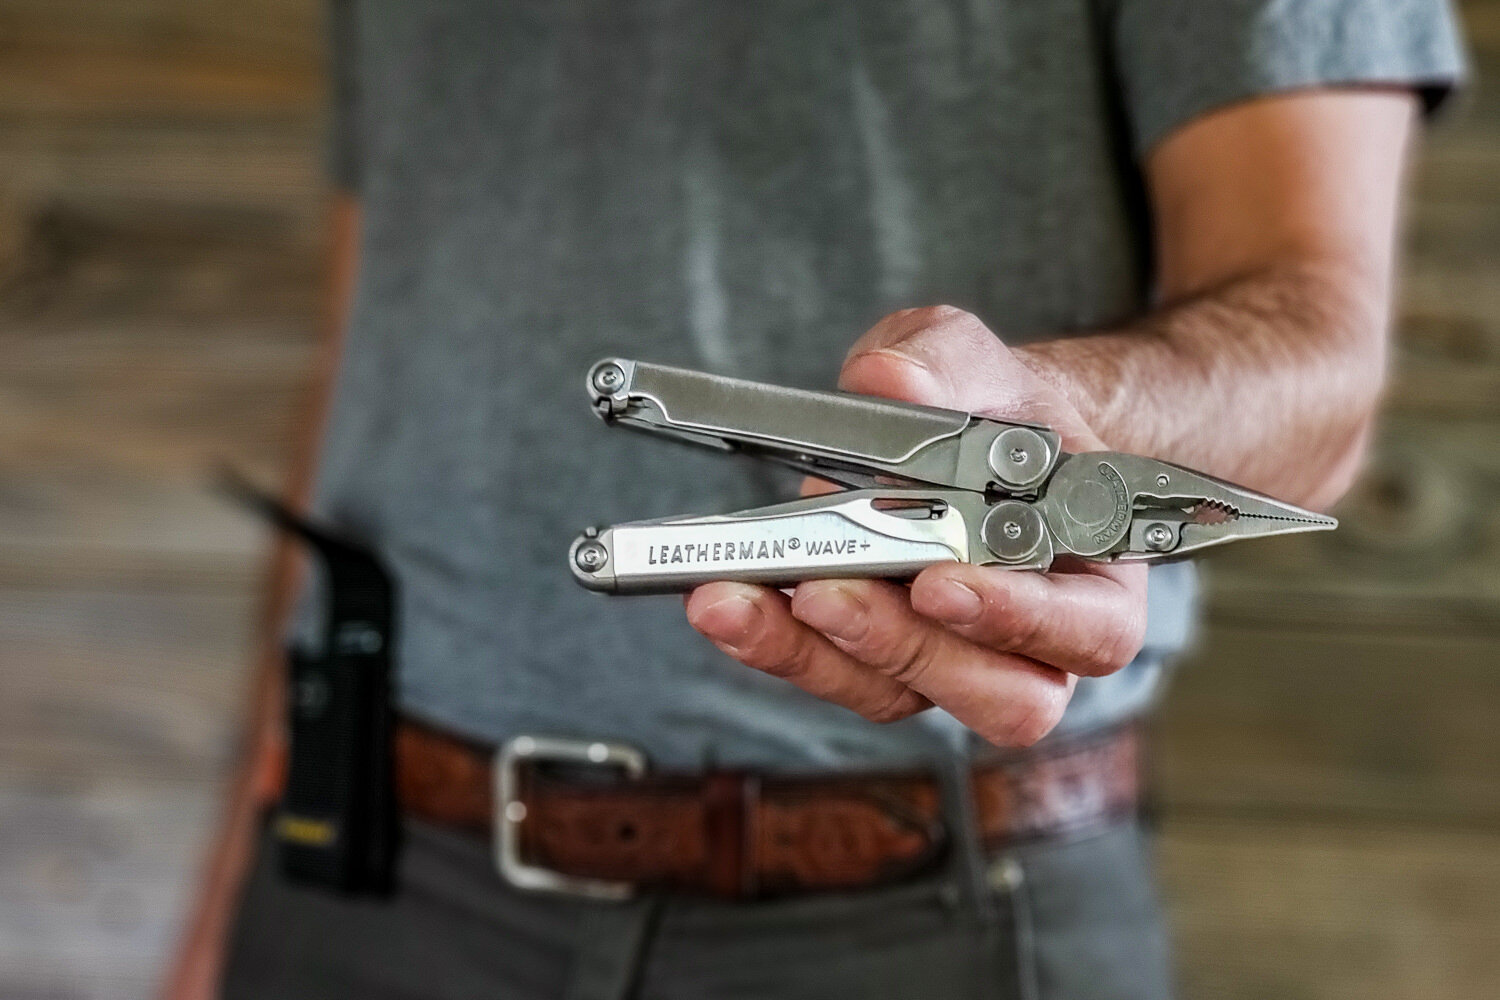 The Leatherman Wave Plus is our top overall multitool for quality, durability, and value.